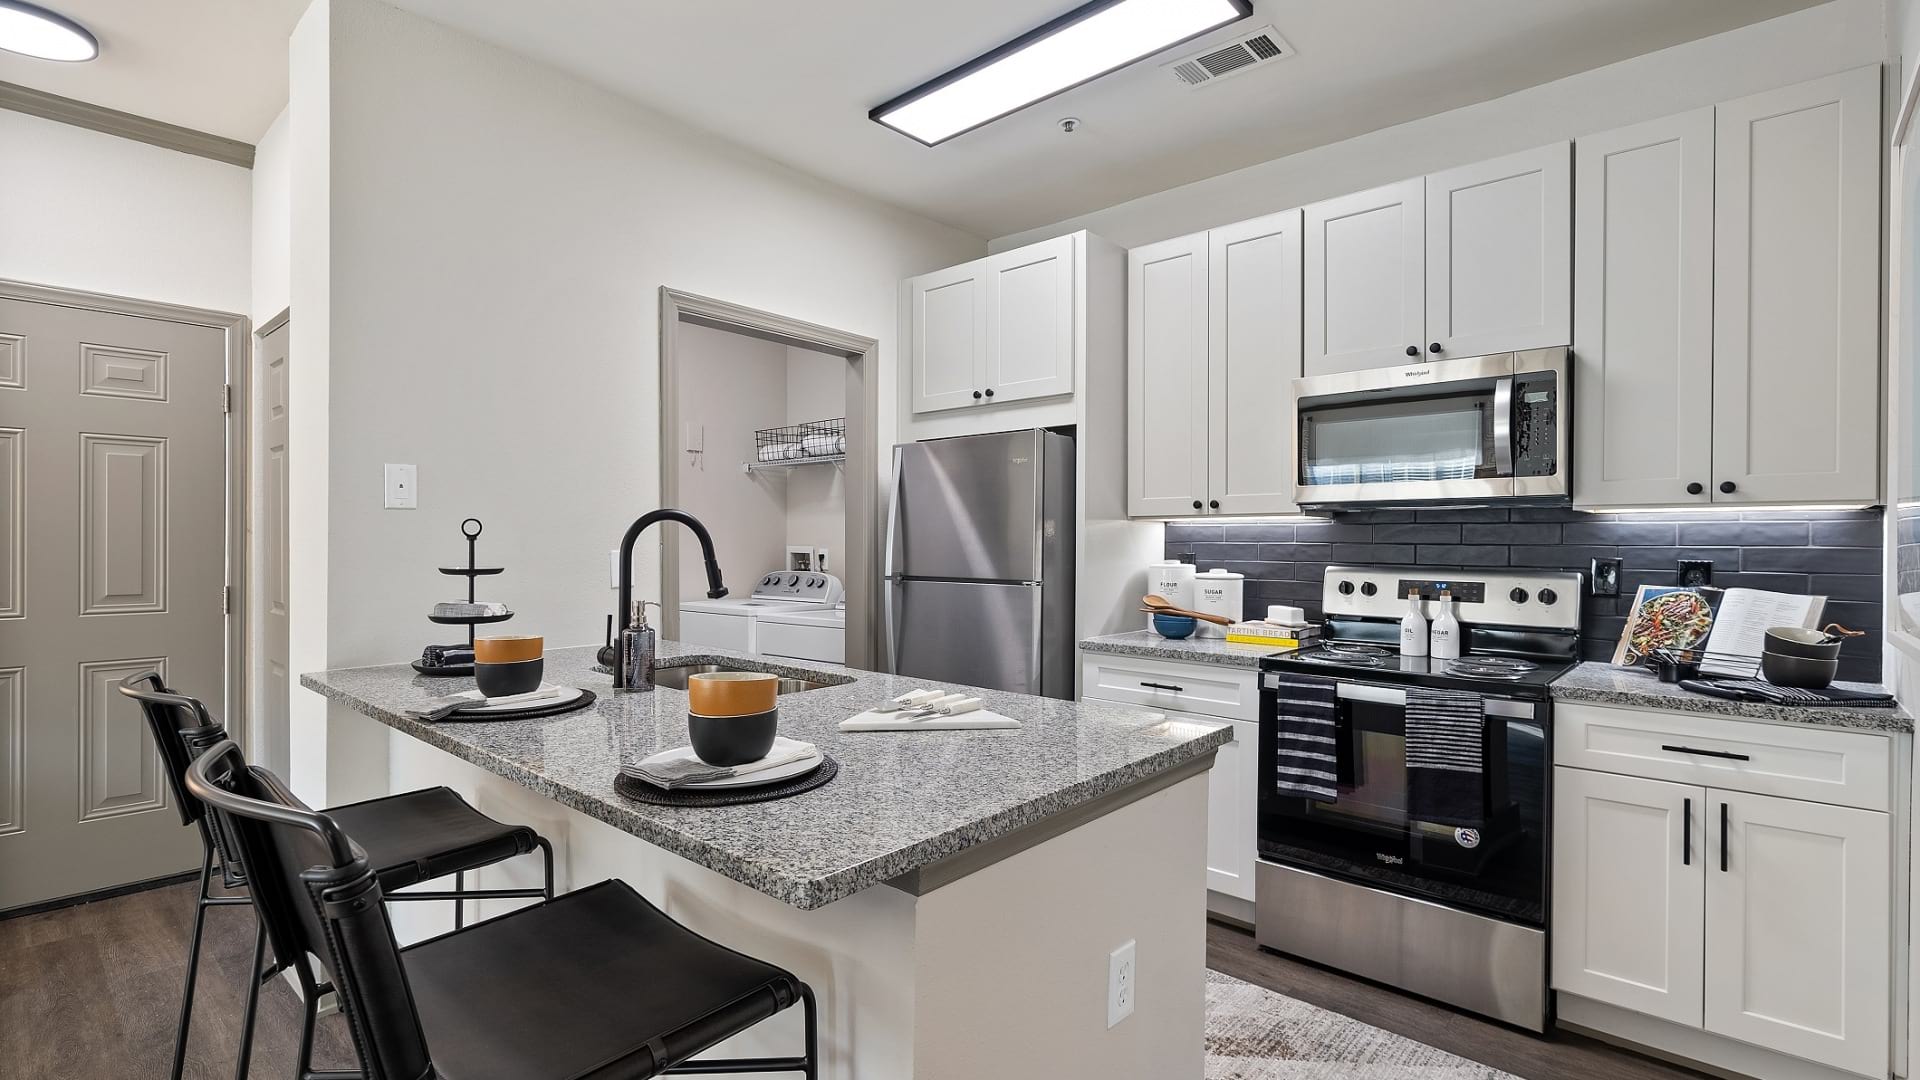 Upscale Kitchen With Stainless Steel Appliances at Our Apartments in Apex, NC